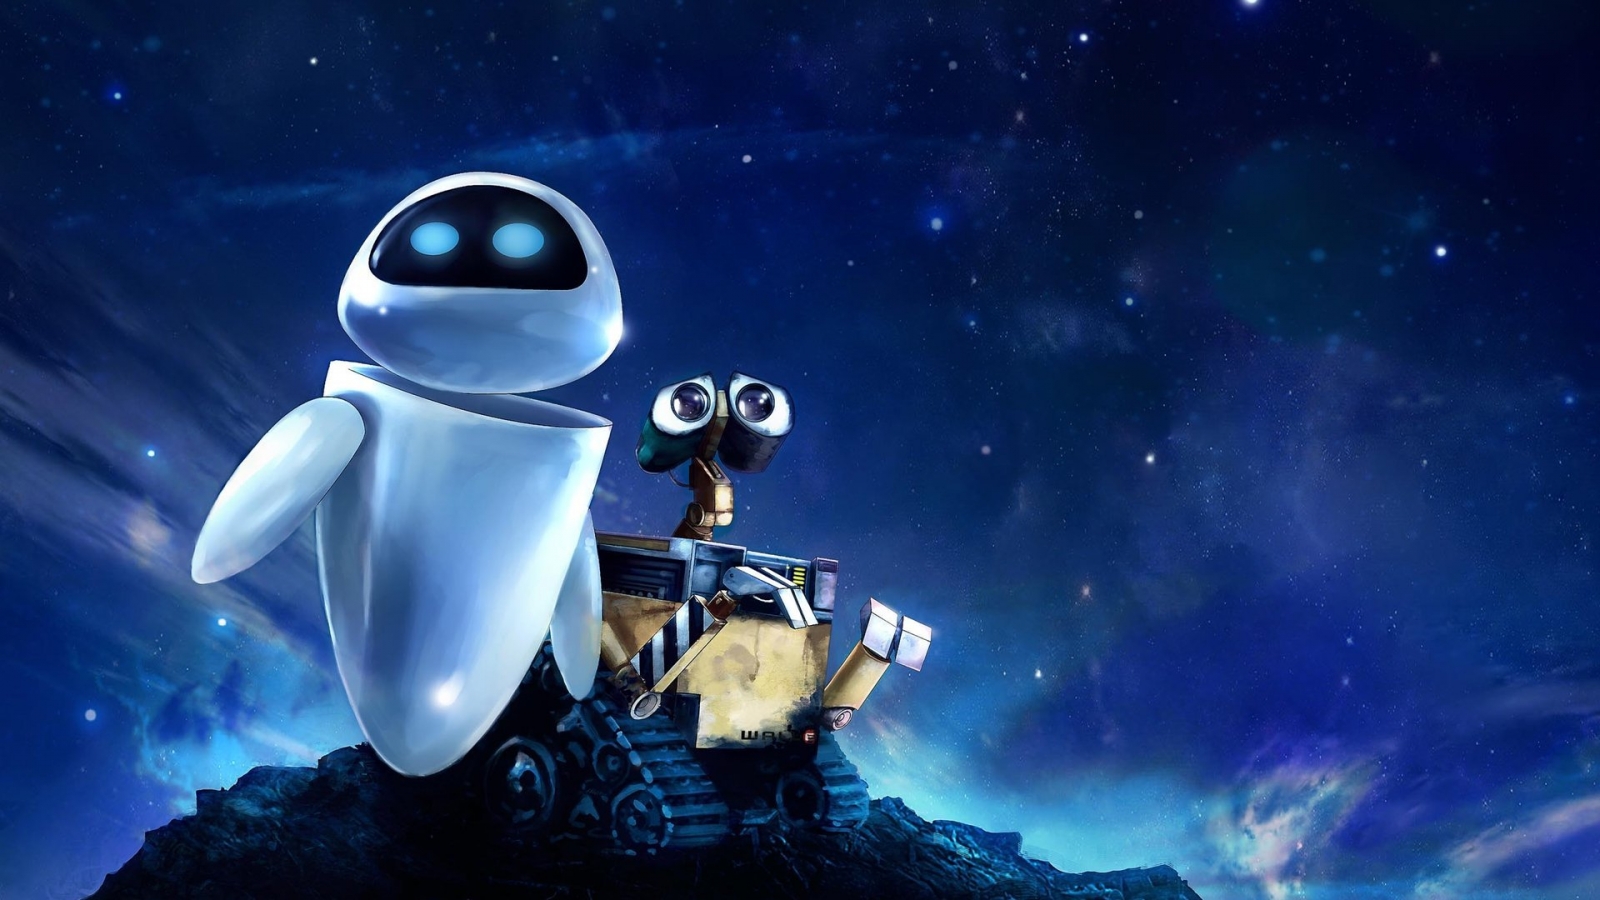 Walle Movie for 1600 x 900 HDTV resolution